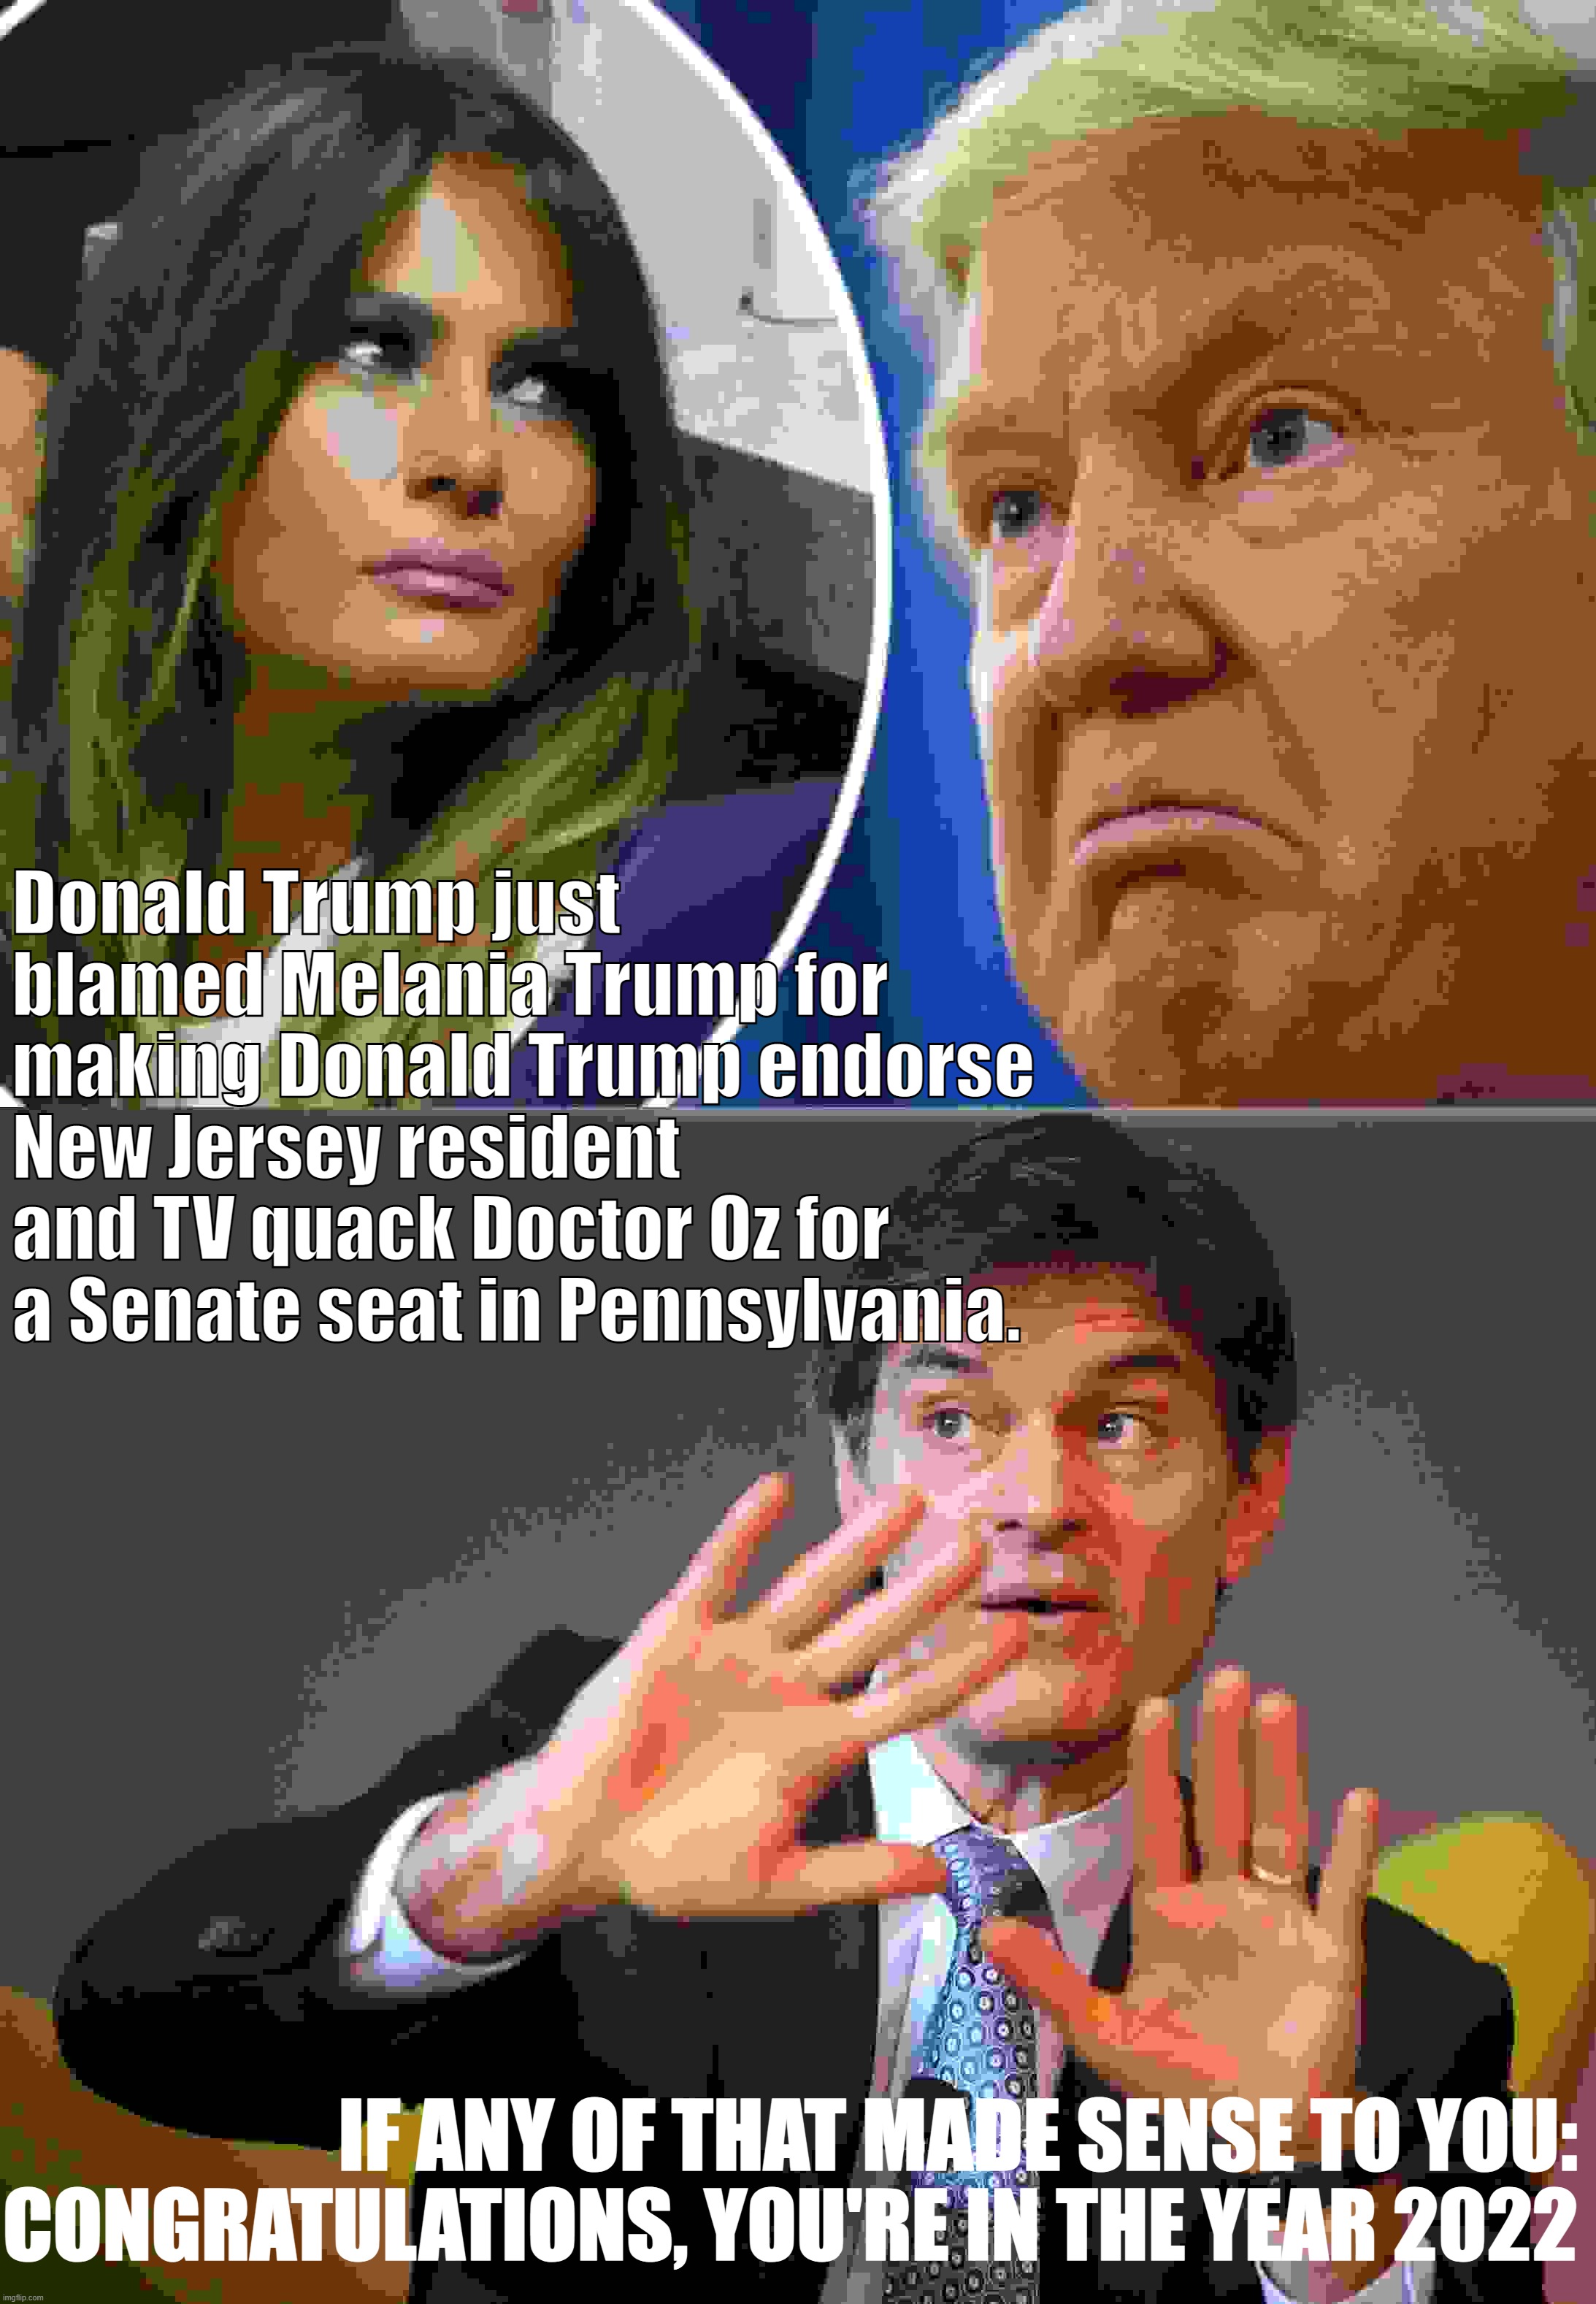 Donald Trump just blamed Melania Trump for making Donald Trump endorse New Jersey resident and TV quack Doctor Oz for a Senate seat in Pennsylvania. IF ANY OF THAT MADE SENSE TO YOU: CONGRATULATIONS, YOU'RE IN THE YEAR 2022 | image tagged in trump and melania,dr oz | made w/ Imgflip meme maker